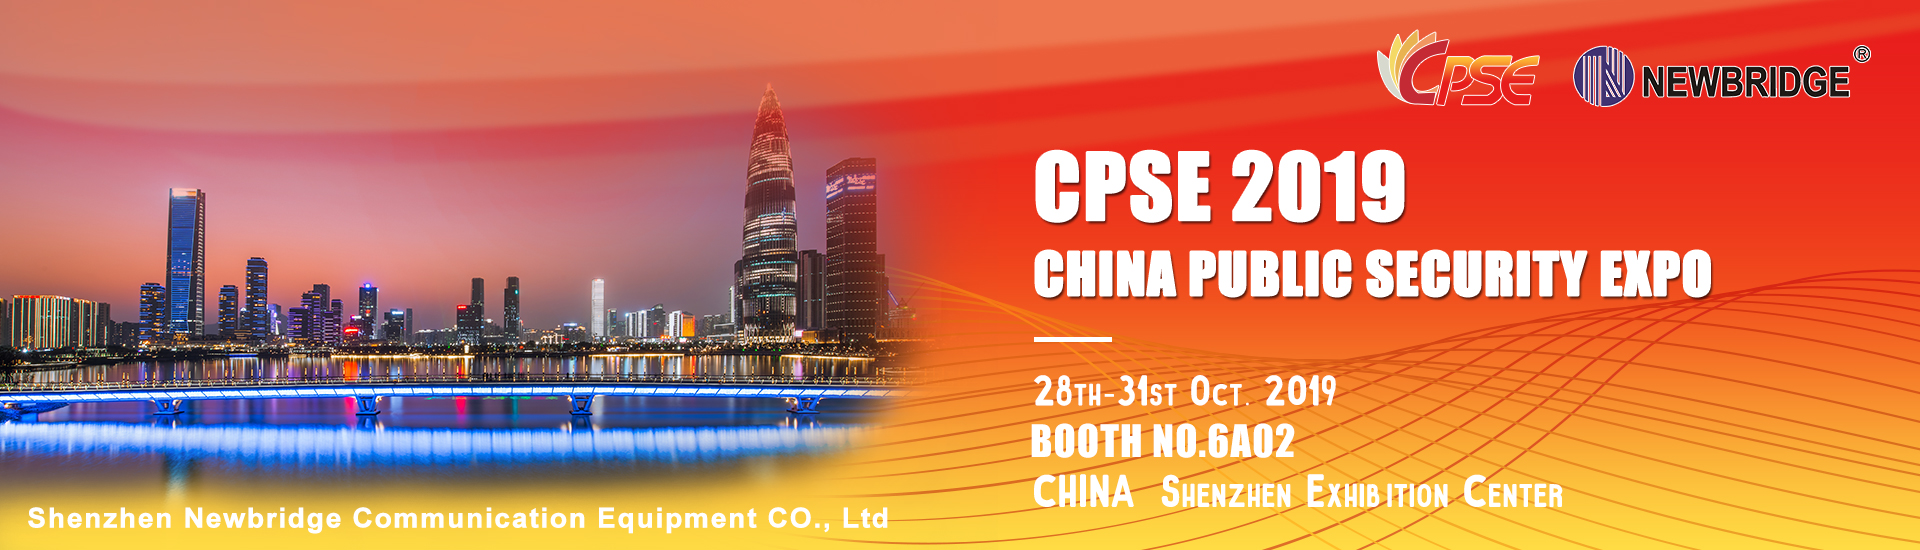 We will attend the CPSE（CHINA PUBLIC SECURITY EXP